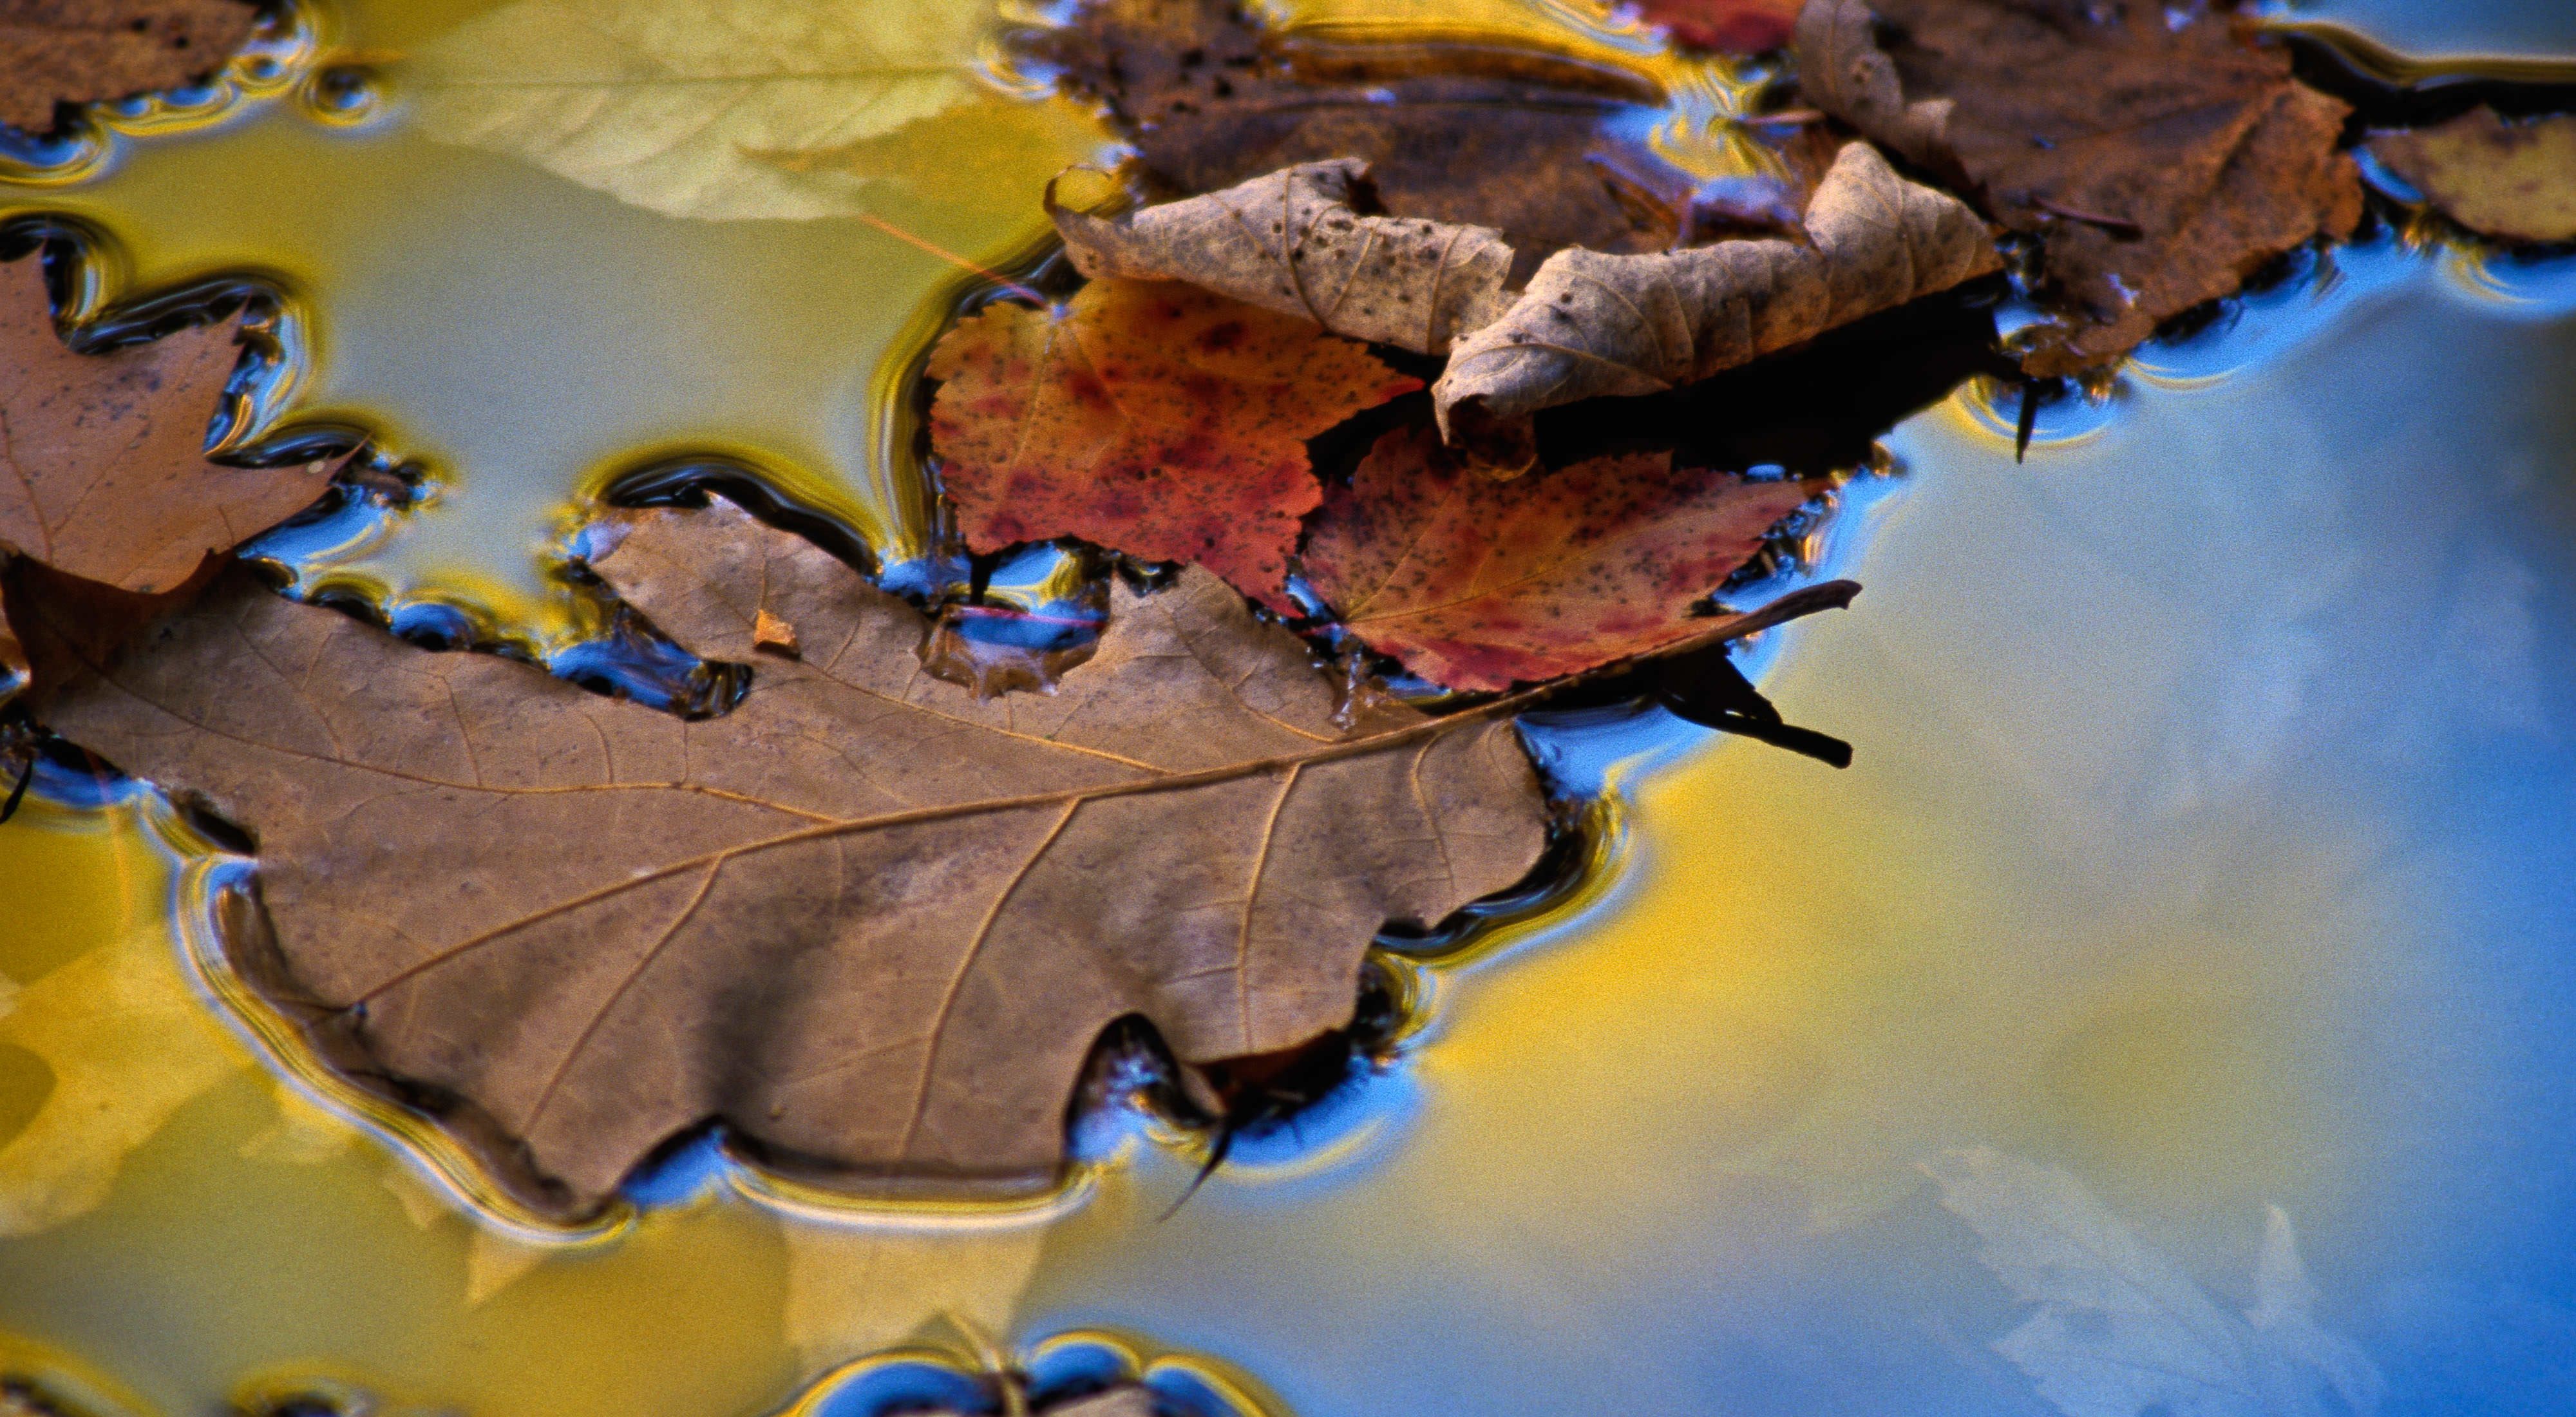 Closeup view of several colorful autumn leaves floating in water.